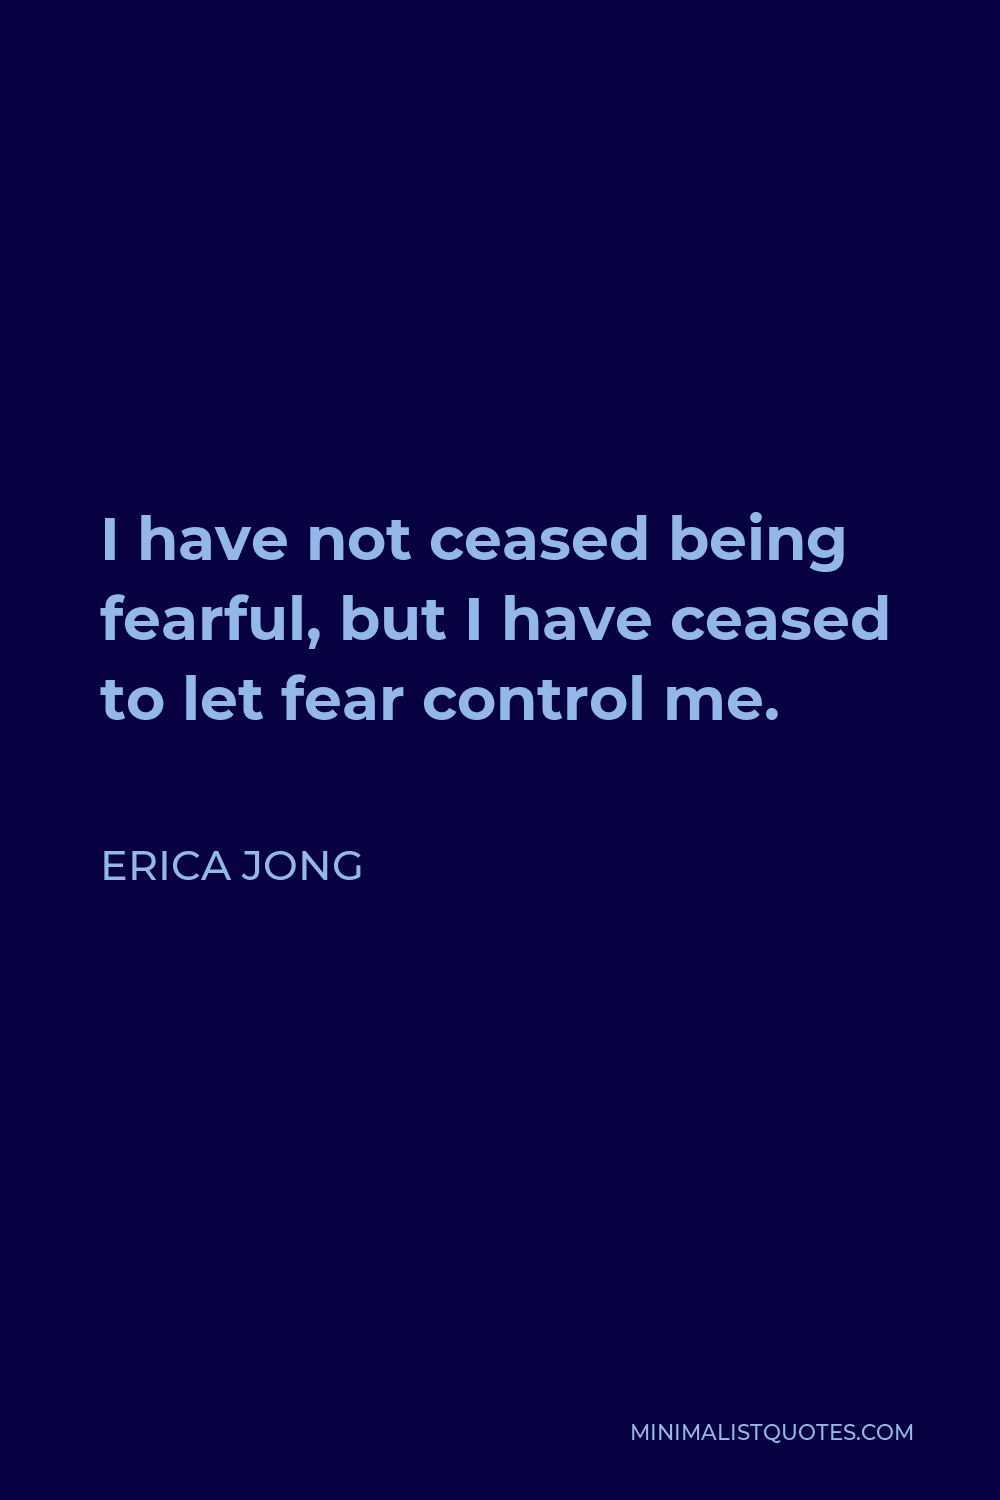 Erica Jong Quote - I have not ceased being fearful, but I have ceased to let fear control me.